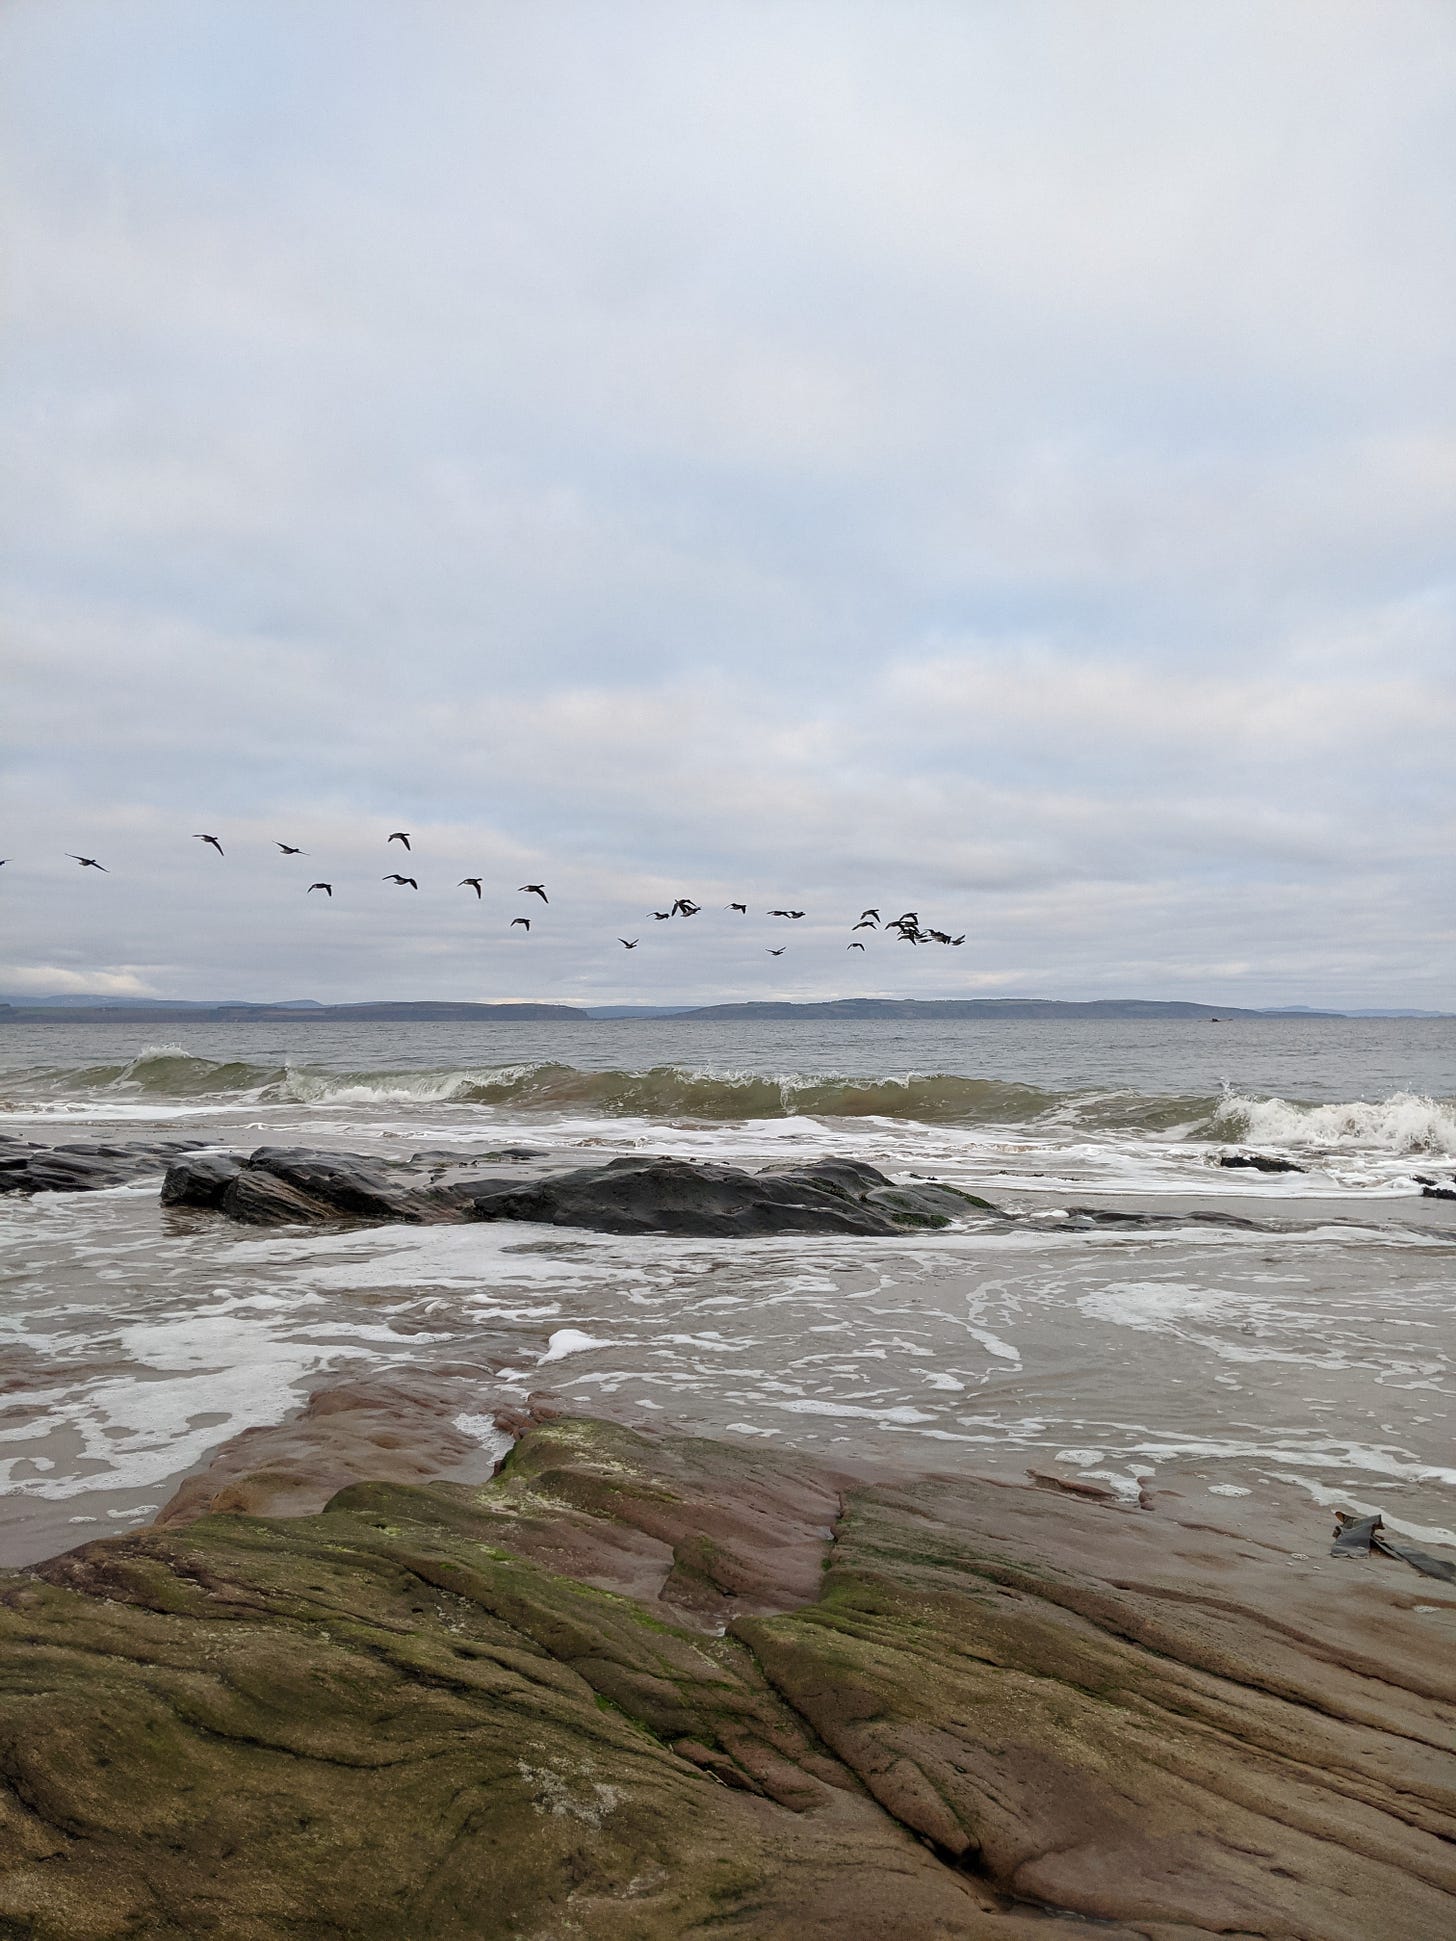 A flock of geese fly above the firth with a wave in the foreground and hills on the horizon